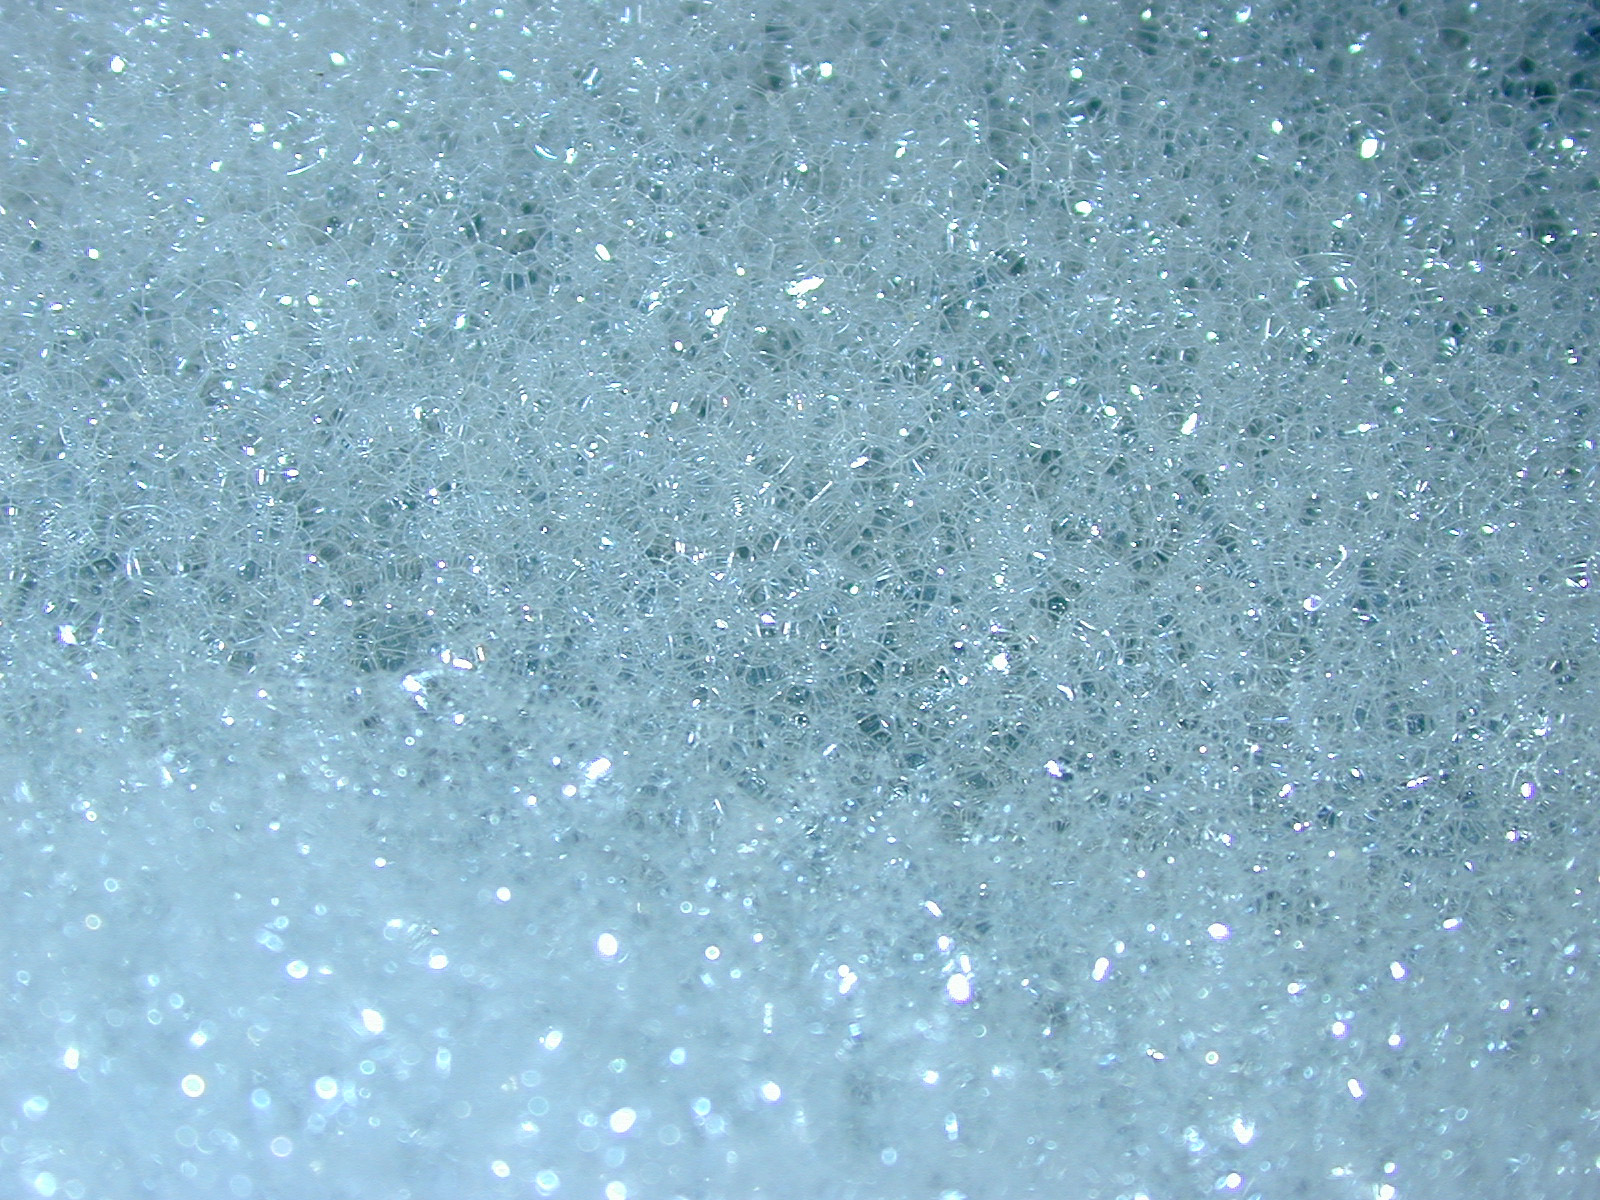 foam bubbles. Free background and textures